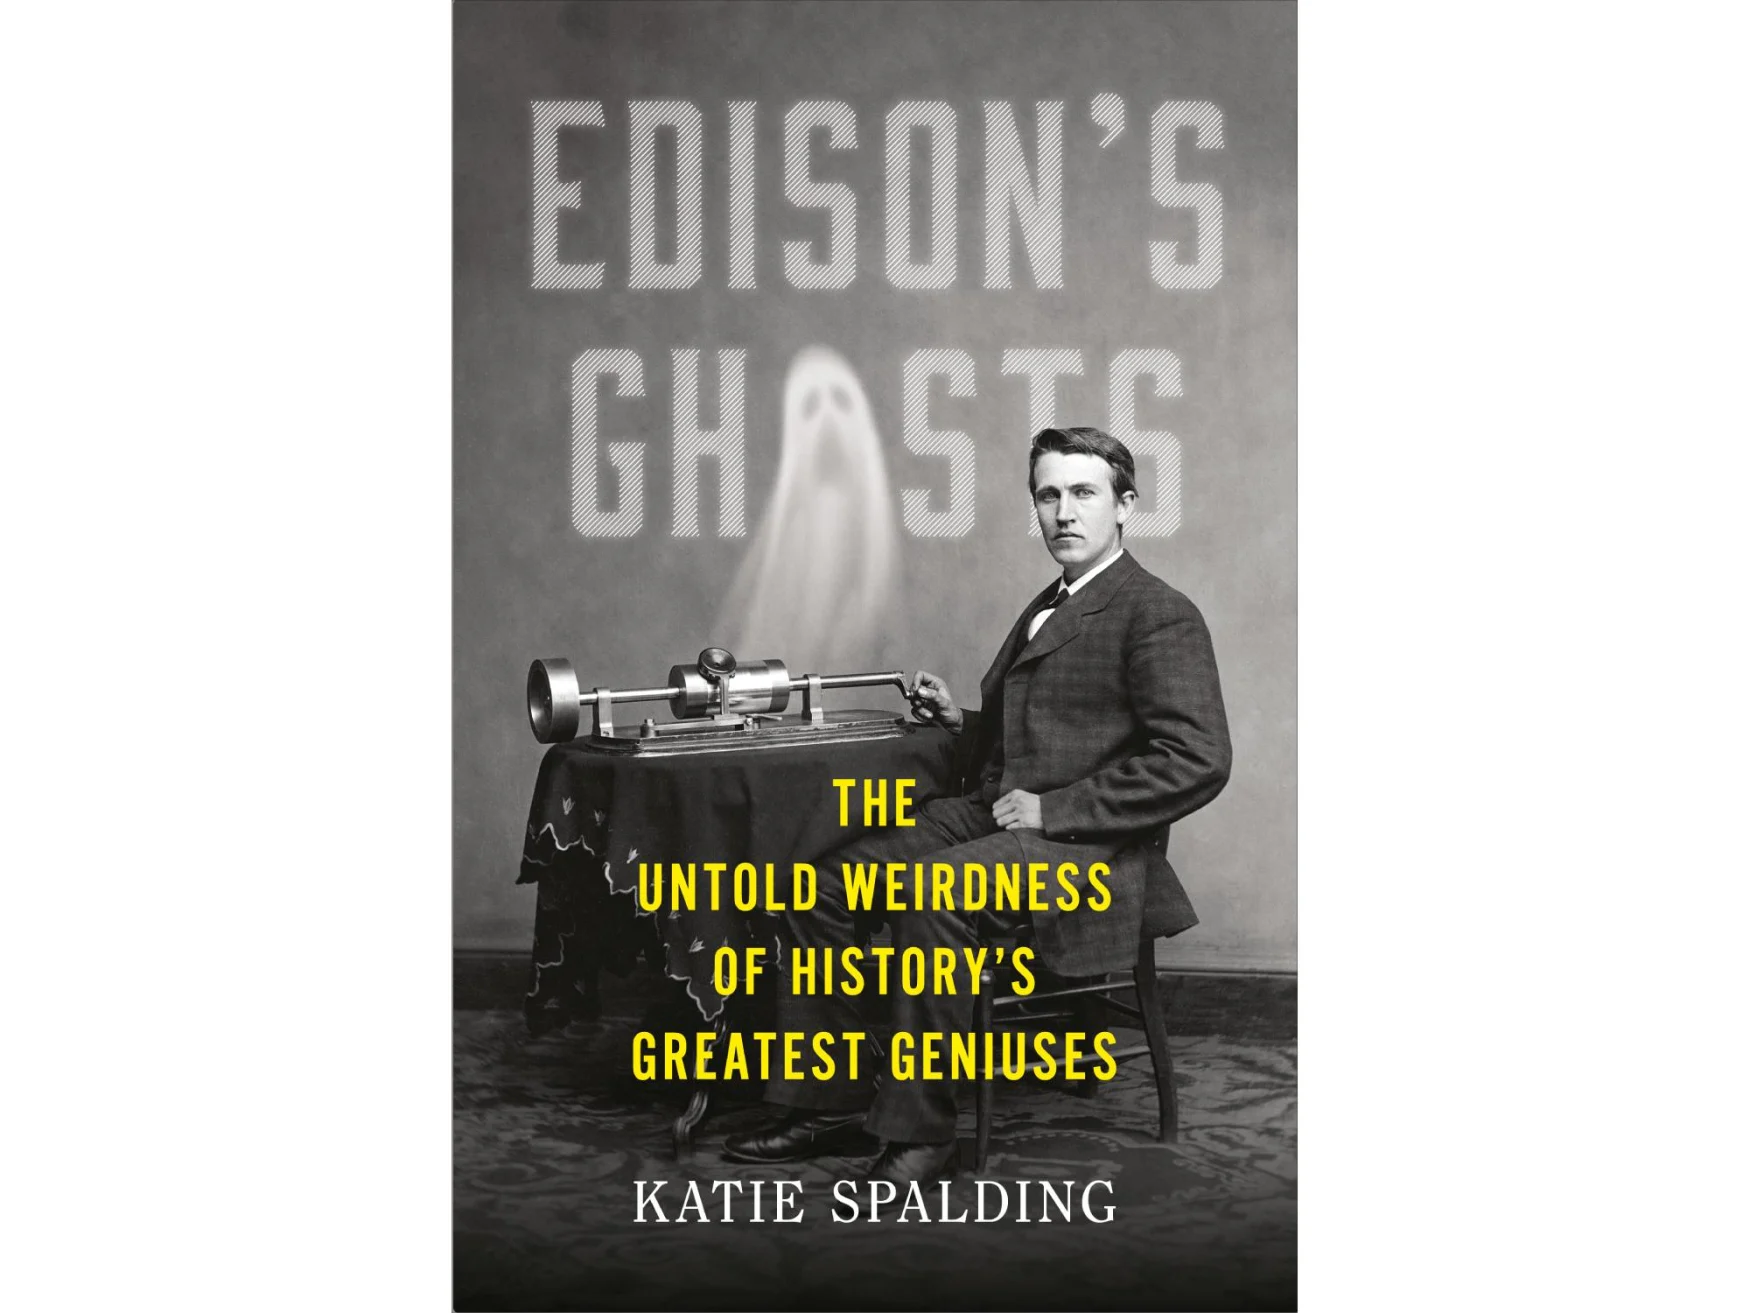 b&w image of Edison sitting at a desk with a device atop it, a ghost rising from the surface to form the O in Ghosts